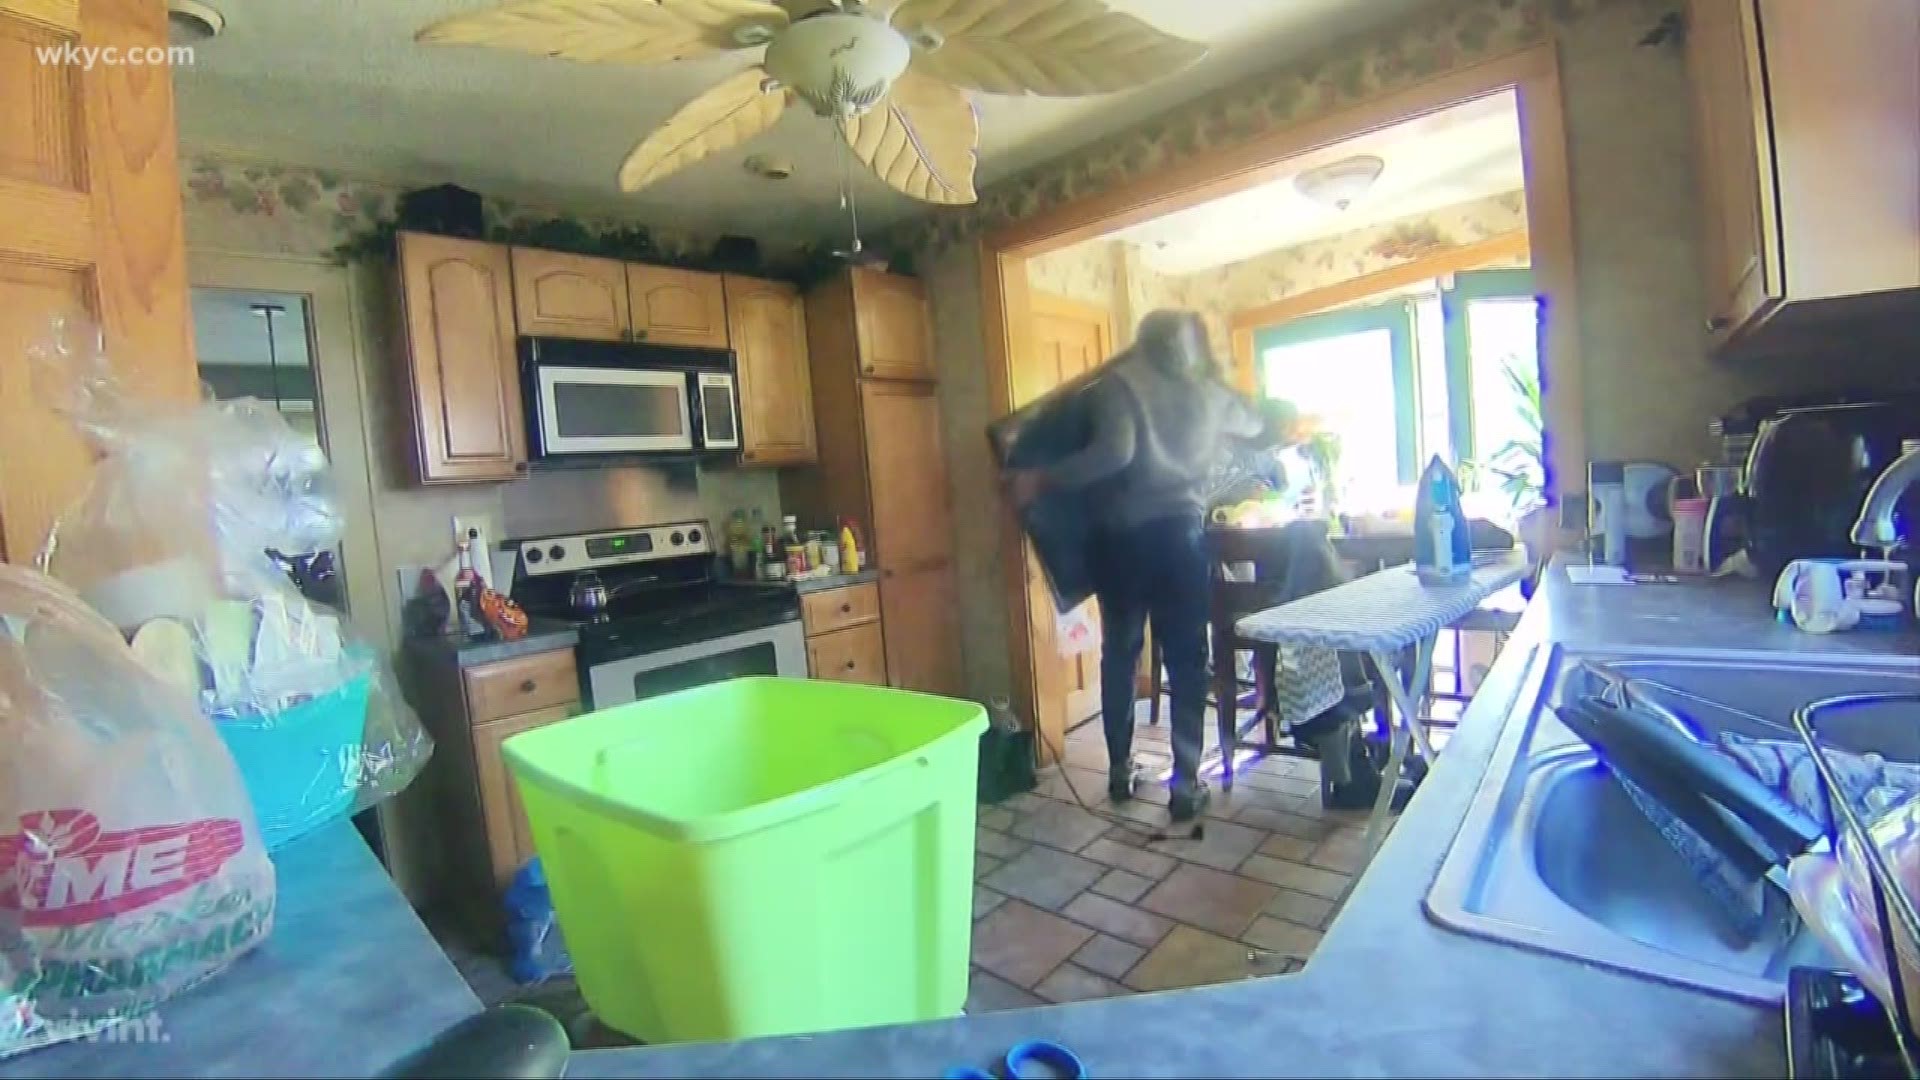 Security footage captures home invasion in Akron; police asking for help in identifying the suspects